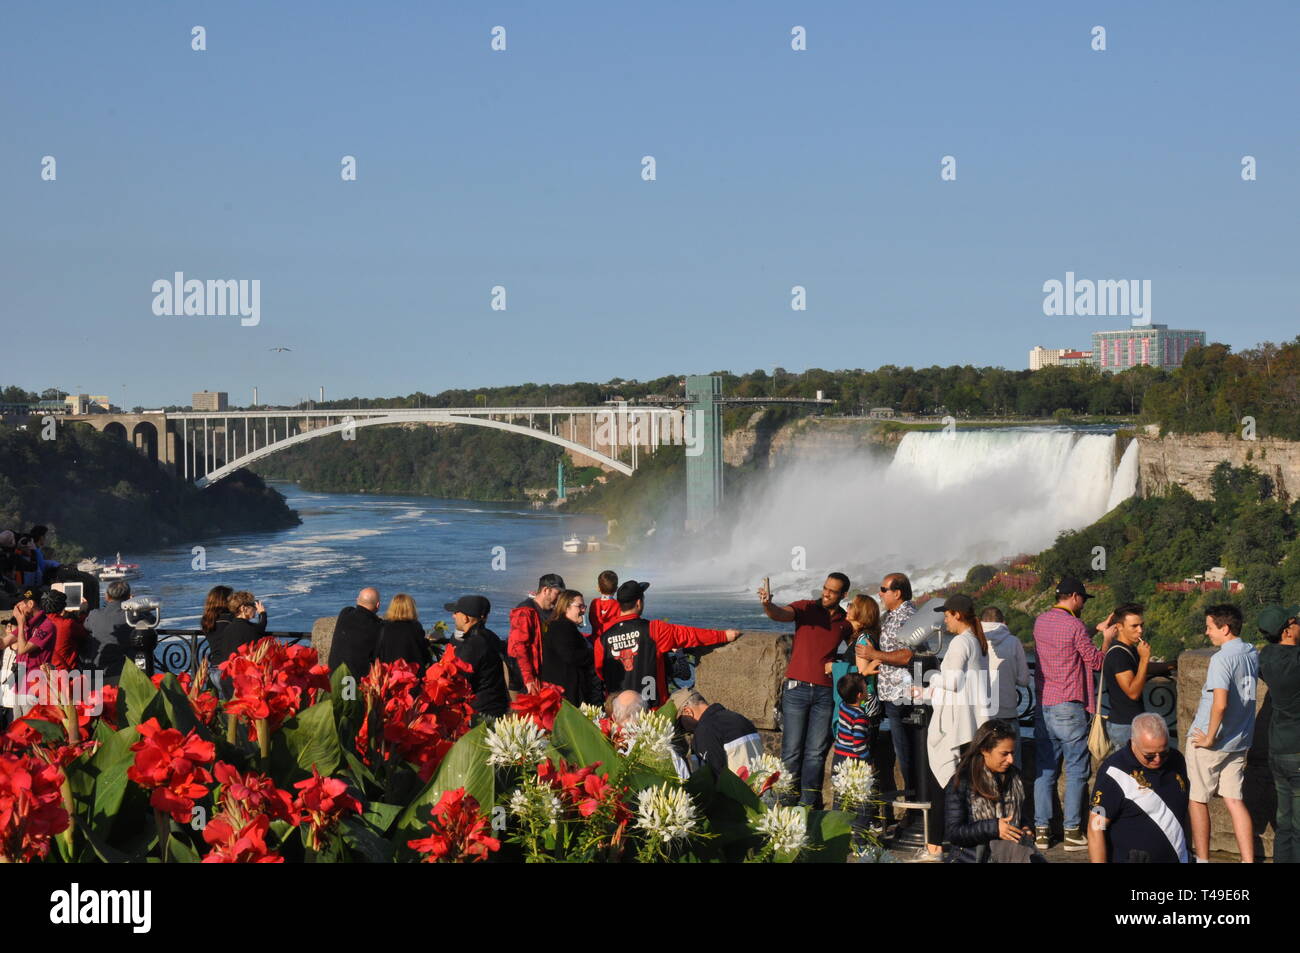 Niagara Falls, Canada - September 10, 2018 - Rainbow of People and Canni Lilies at Table Rock Viewing Horseshoe Falls in Niagara Falls, Canada - Edito Stock Photo